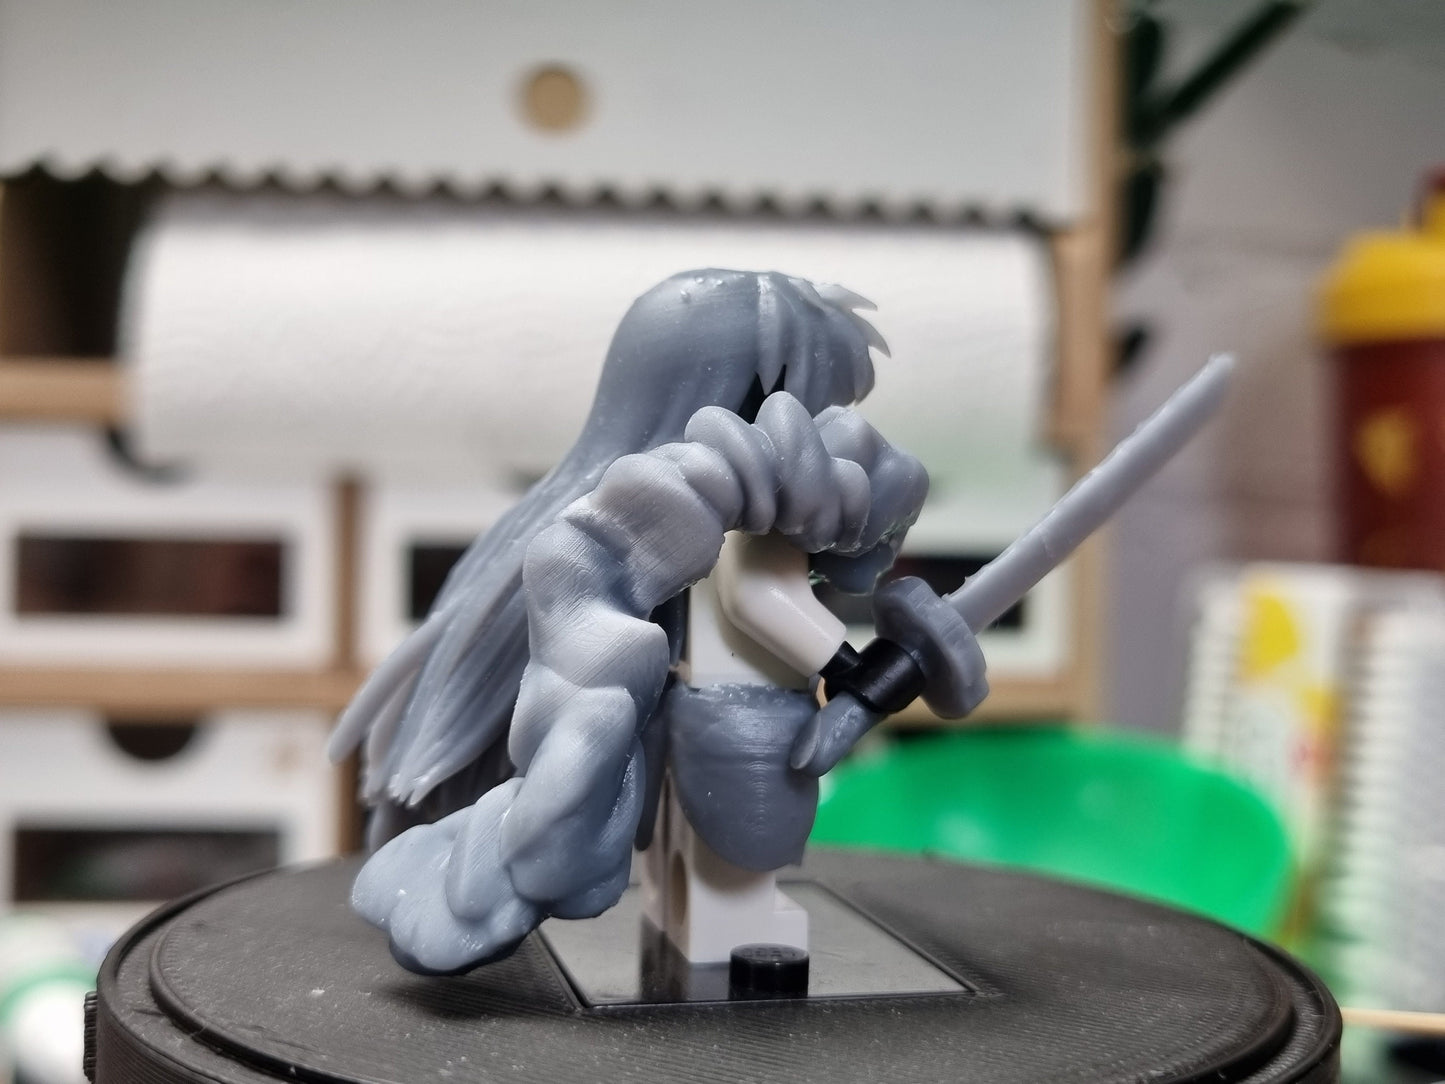 Building toy long haired warrior!